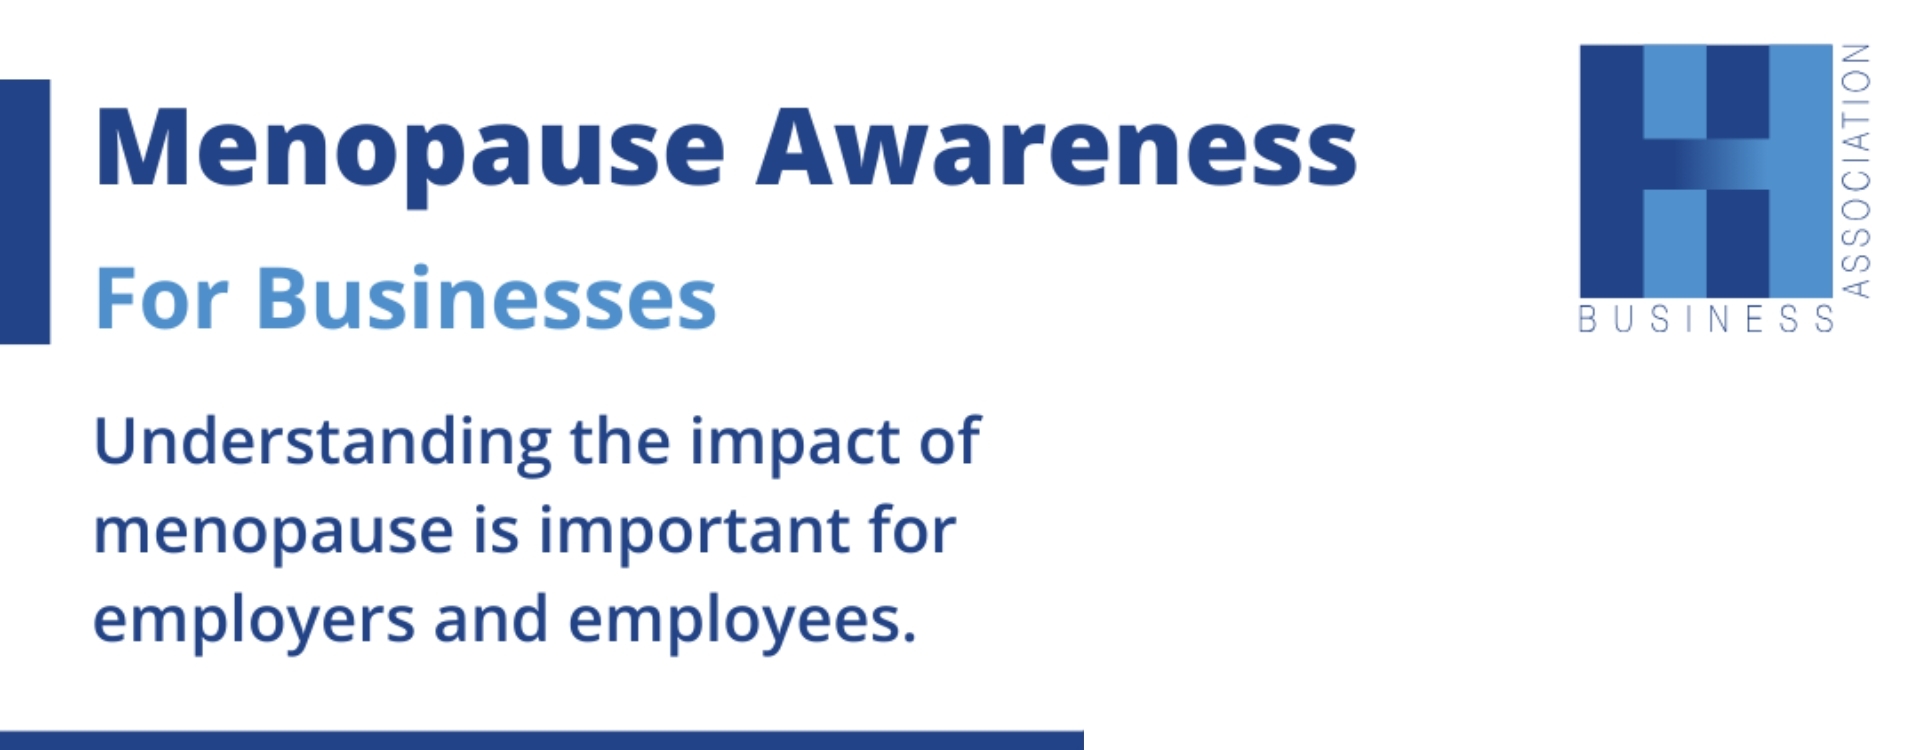 Menopause Awareness for businesses 8th May